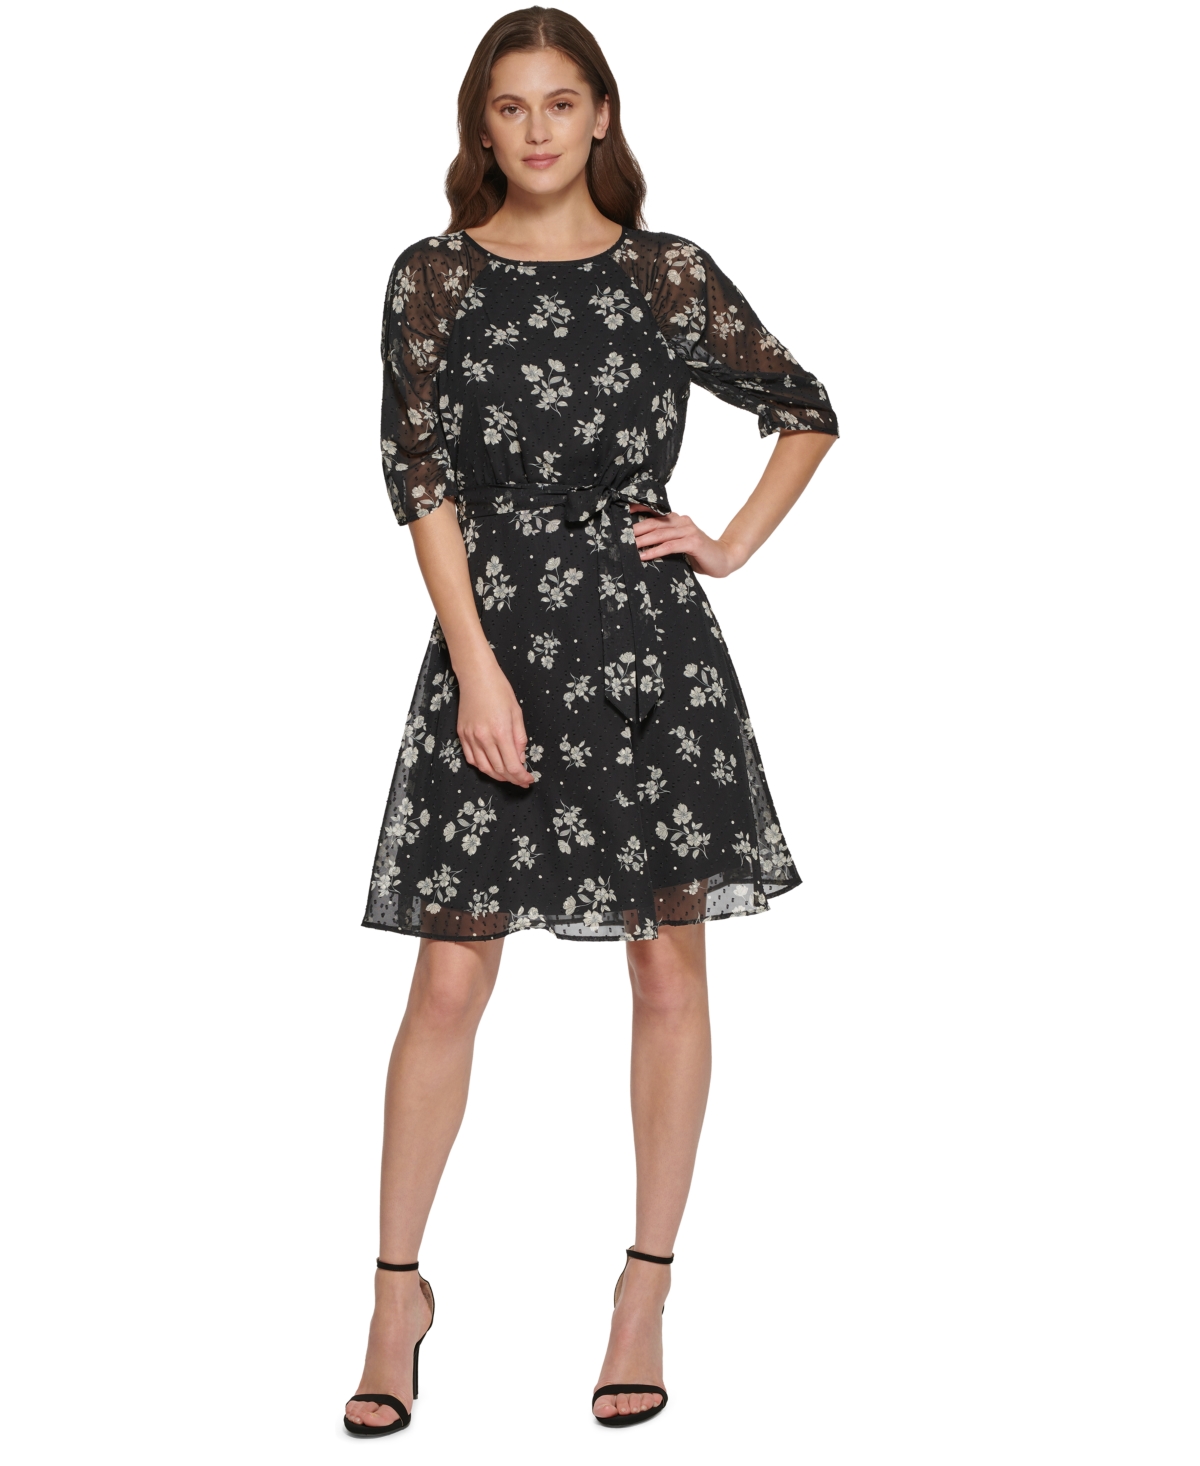 DKNY WOMEN'S FLORAL-PRINT PUFF-SLEEVE FIT & FLARE DRESS